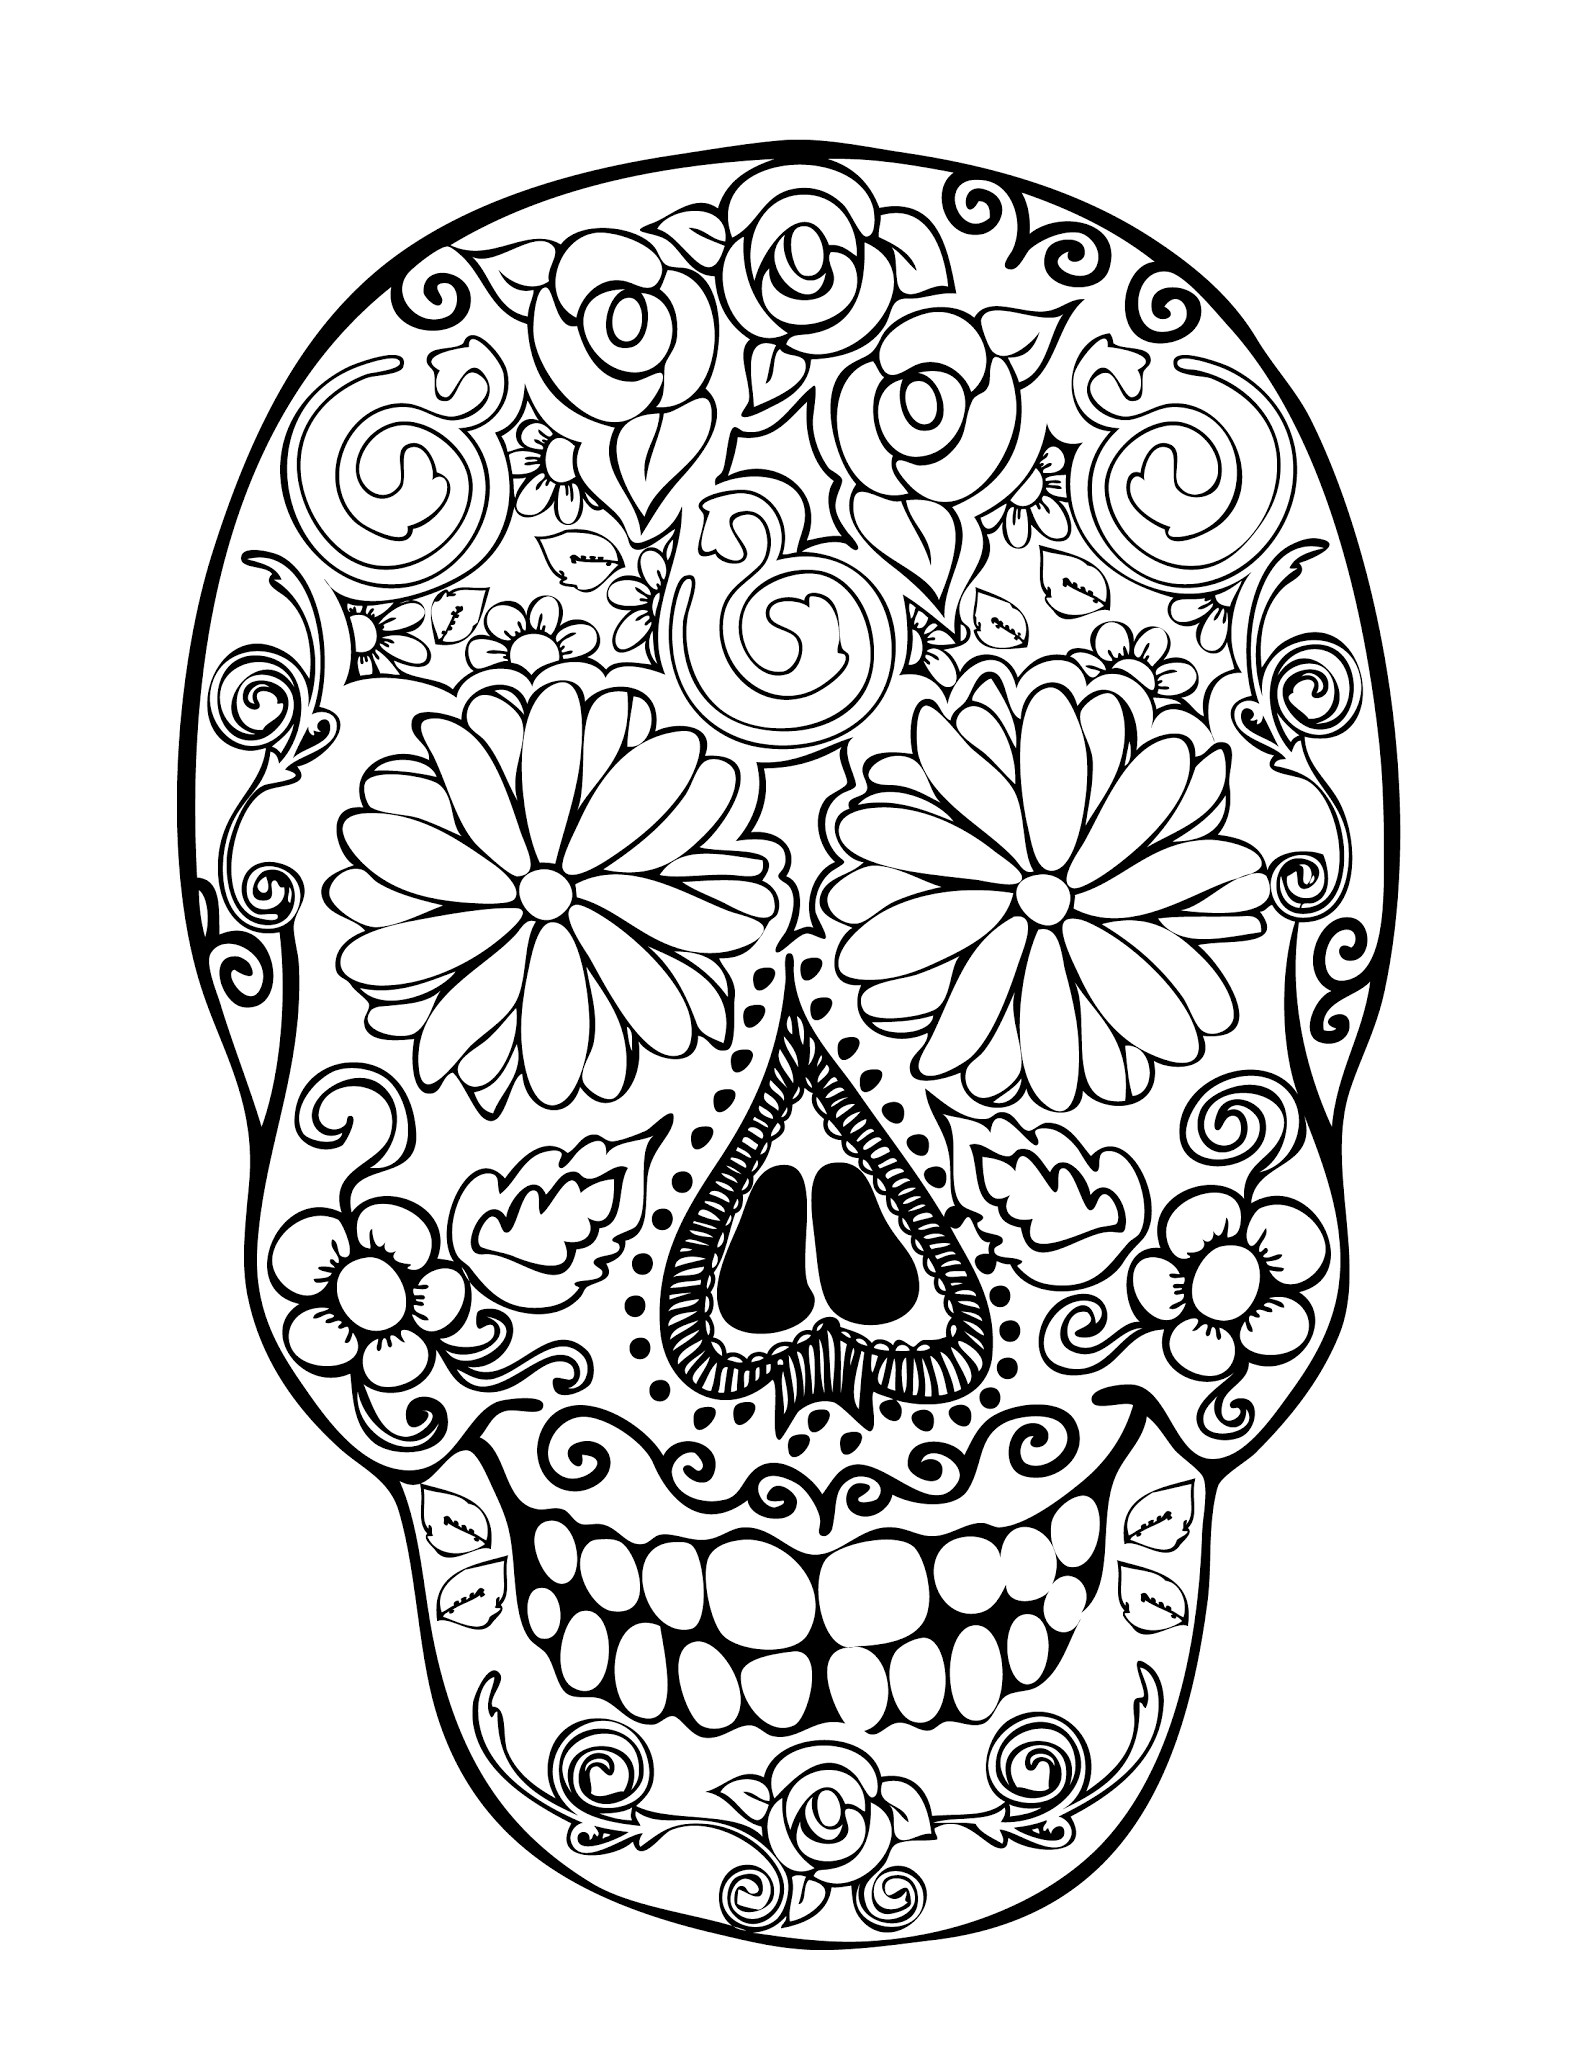 Coloring Book Pages Skulls
 28 skull coloring pages for kids Print Color Craft